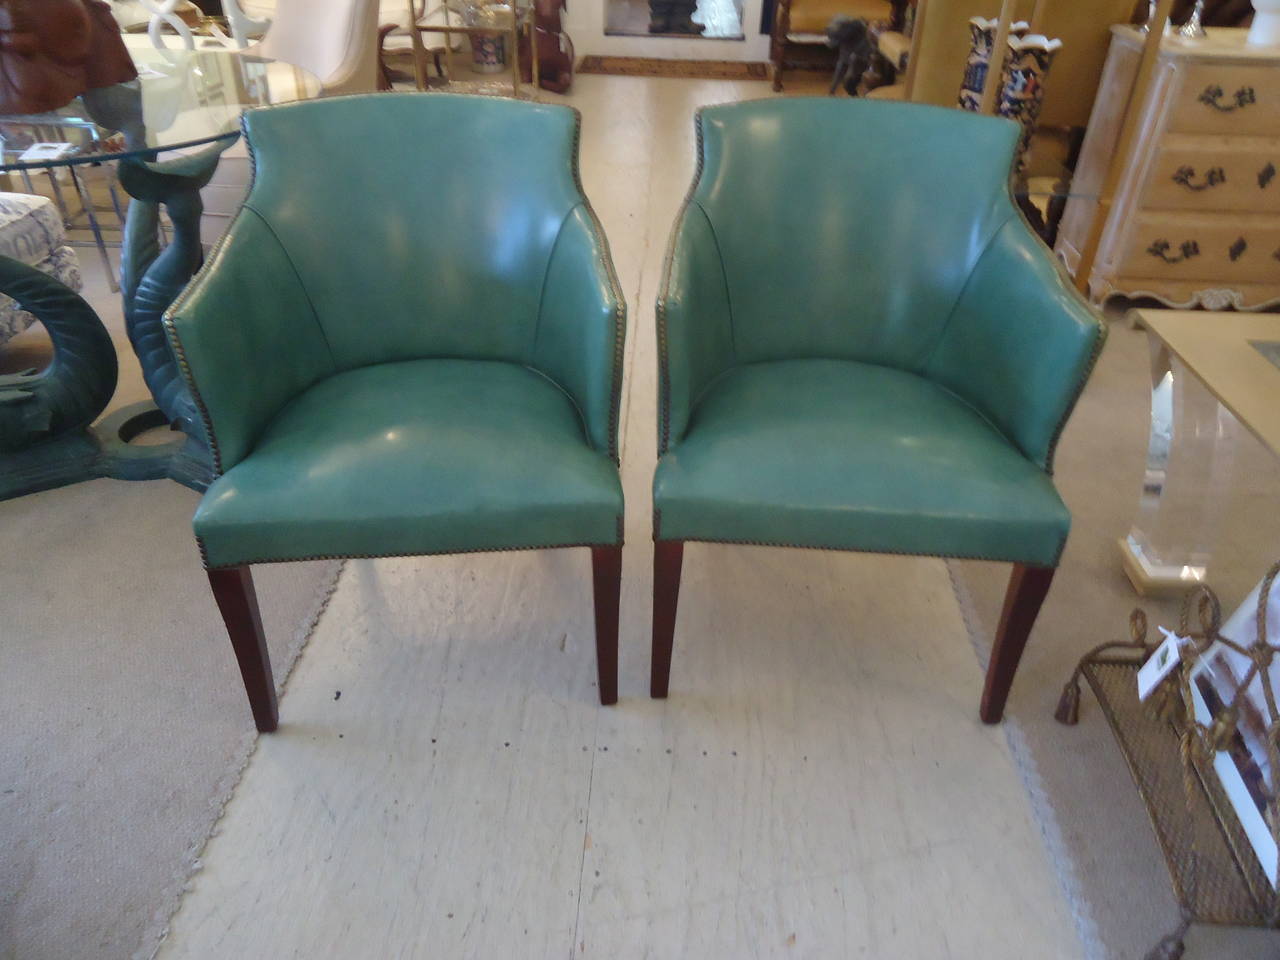 Beautiful tailored lines on this pair of vintage barrel back tub chairs covered in soothing sea foam bluish green leather, finished with bronze colored nailheads, sitting on tapered mahogany legs. Firm, very comfortable chairs.
Seat depth 19